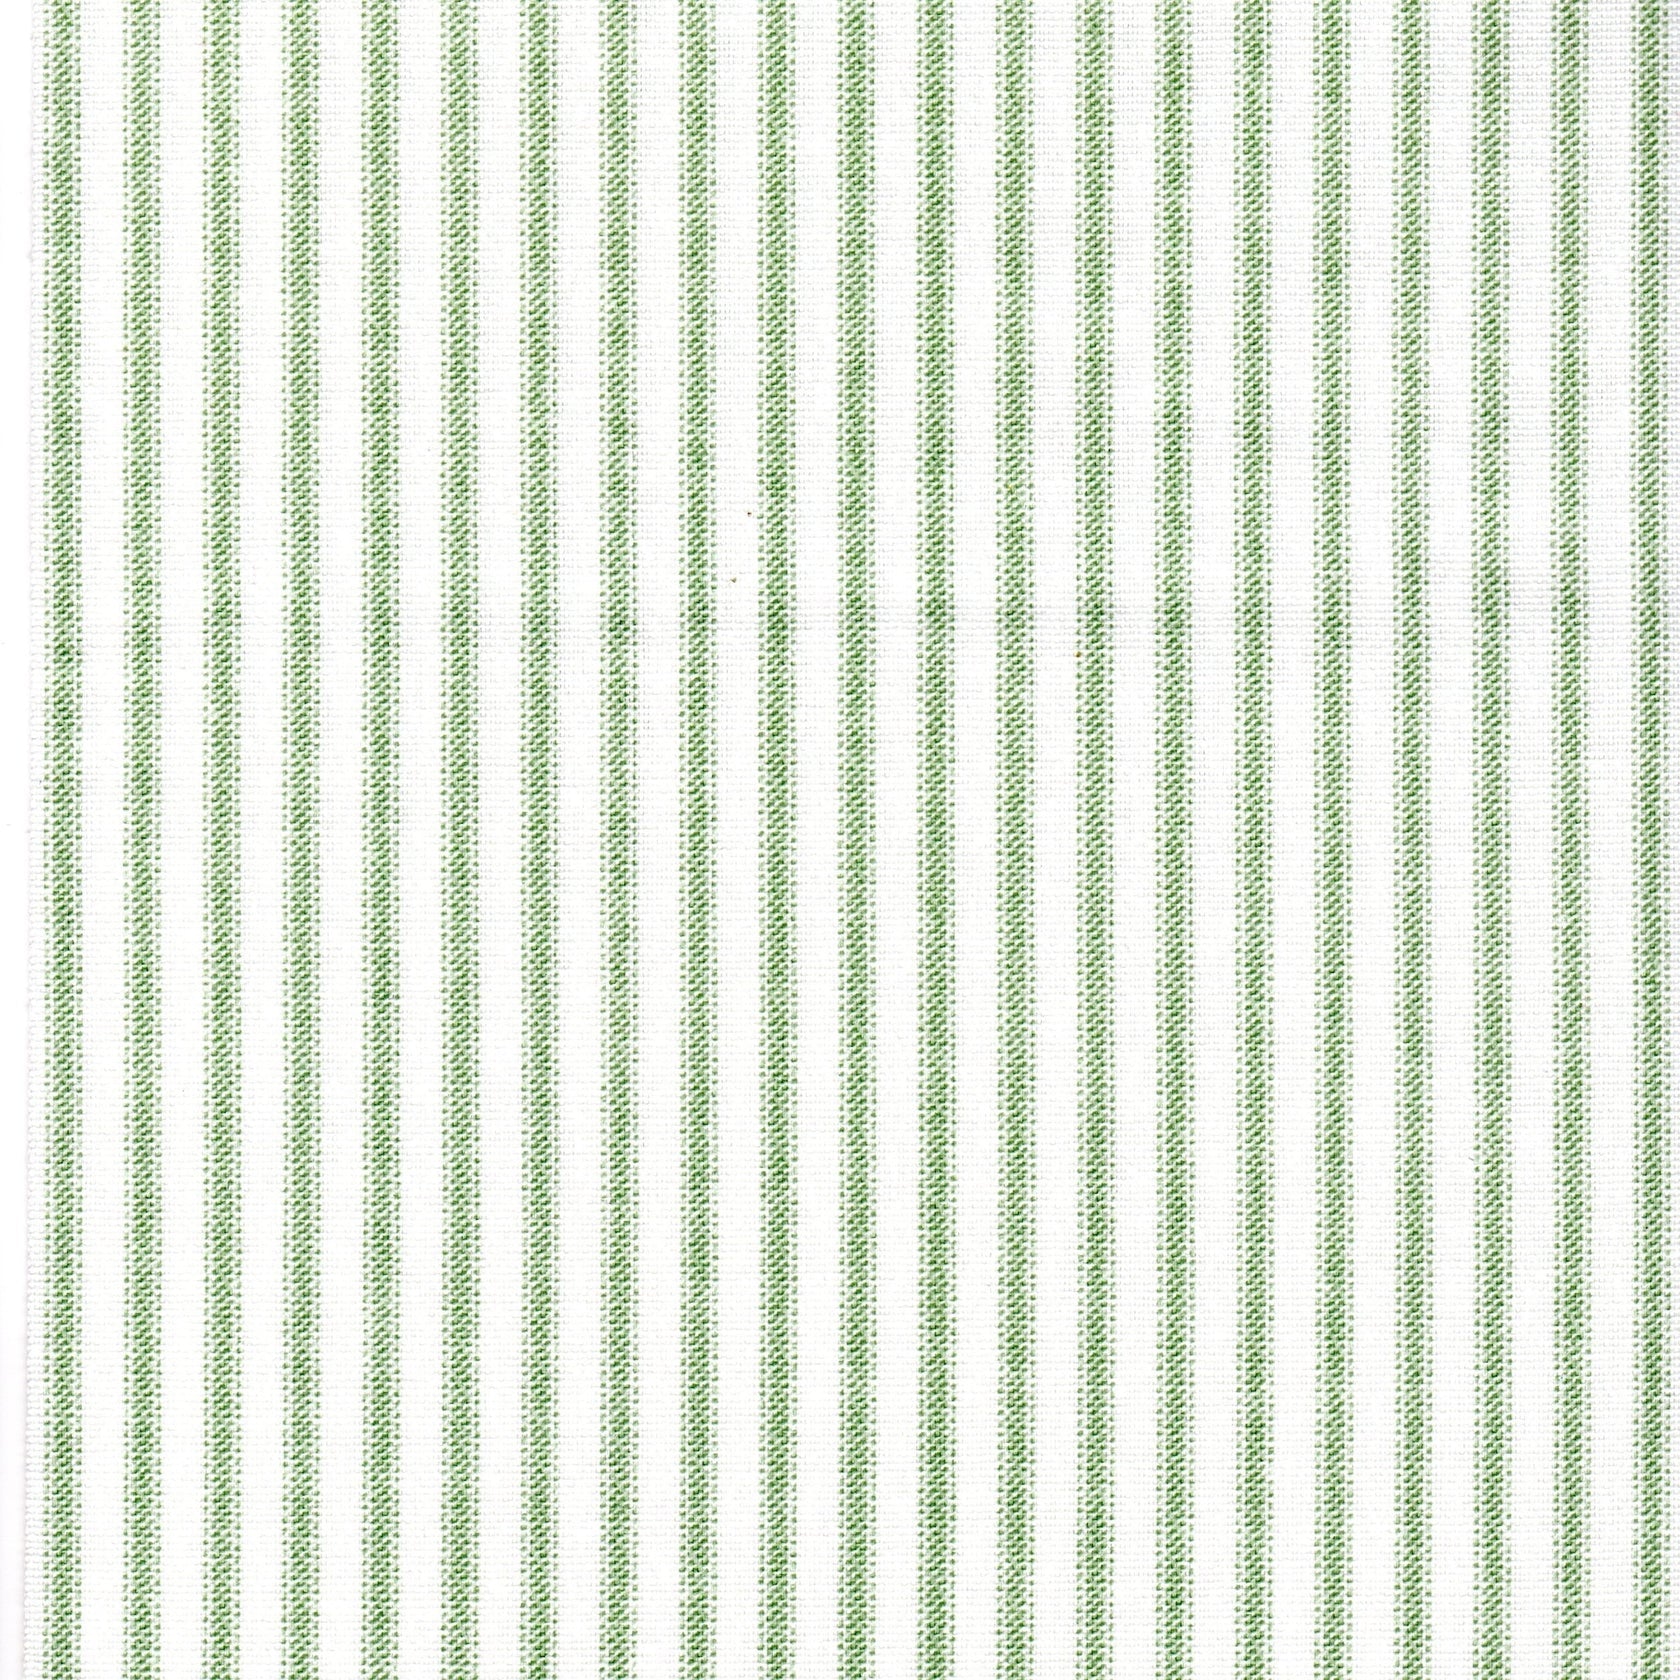 empress swag valance in Classic Sage Green Ticking Stripe on White